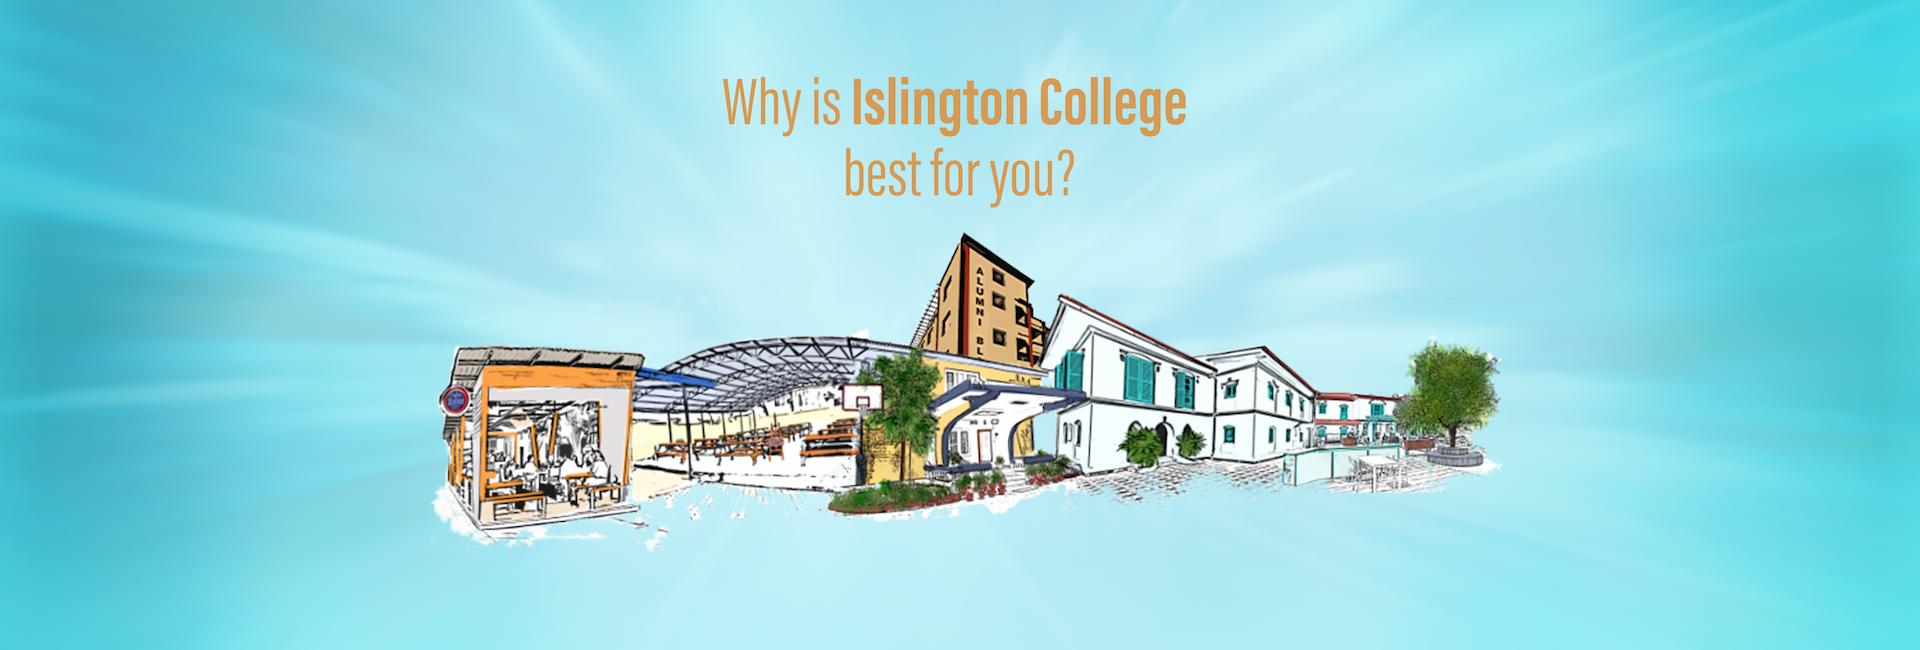 Why is Islington College best for you?